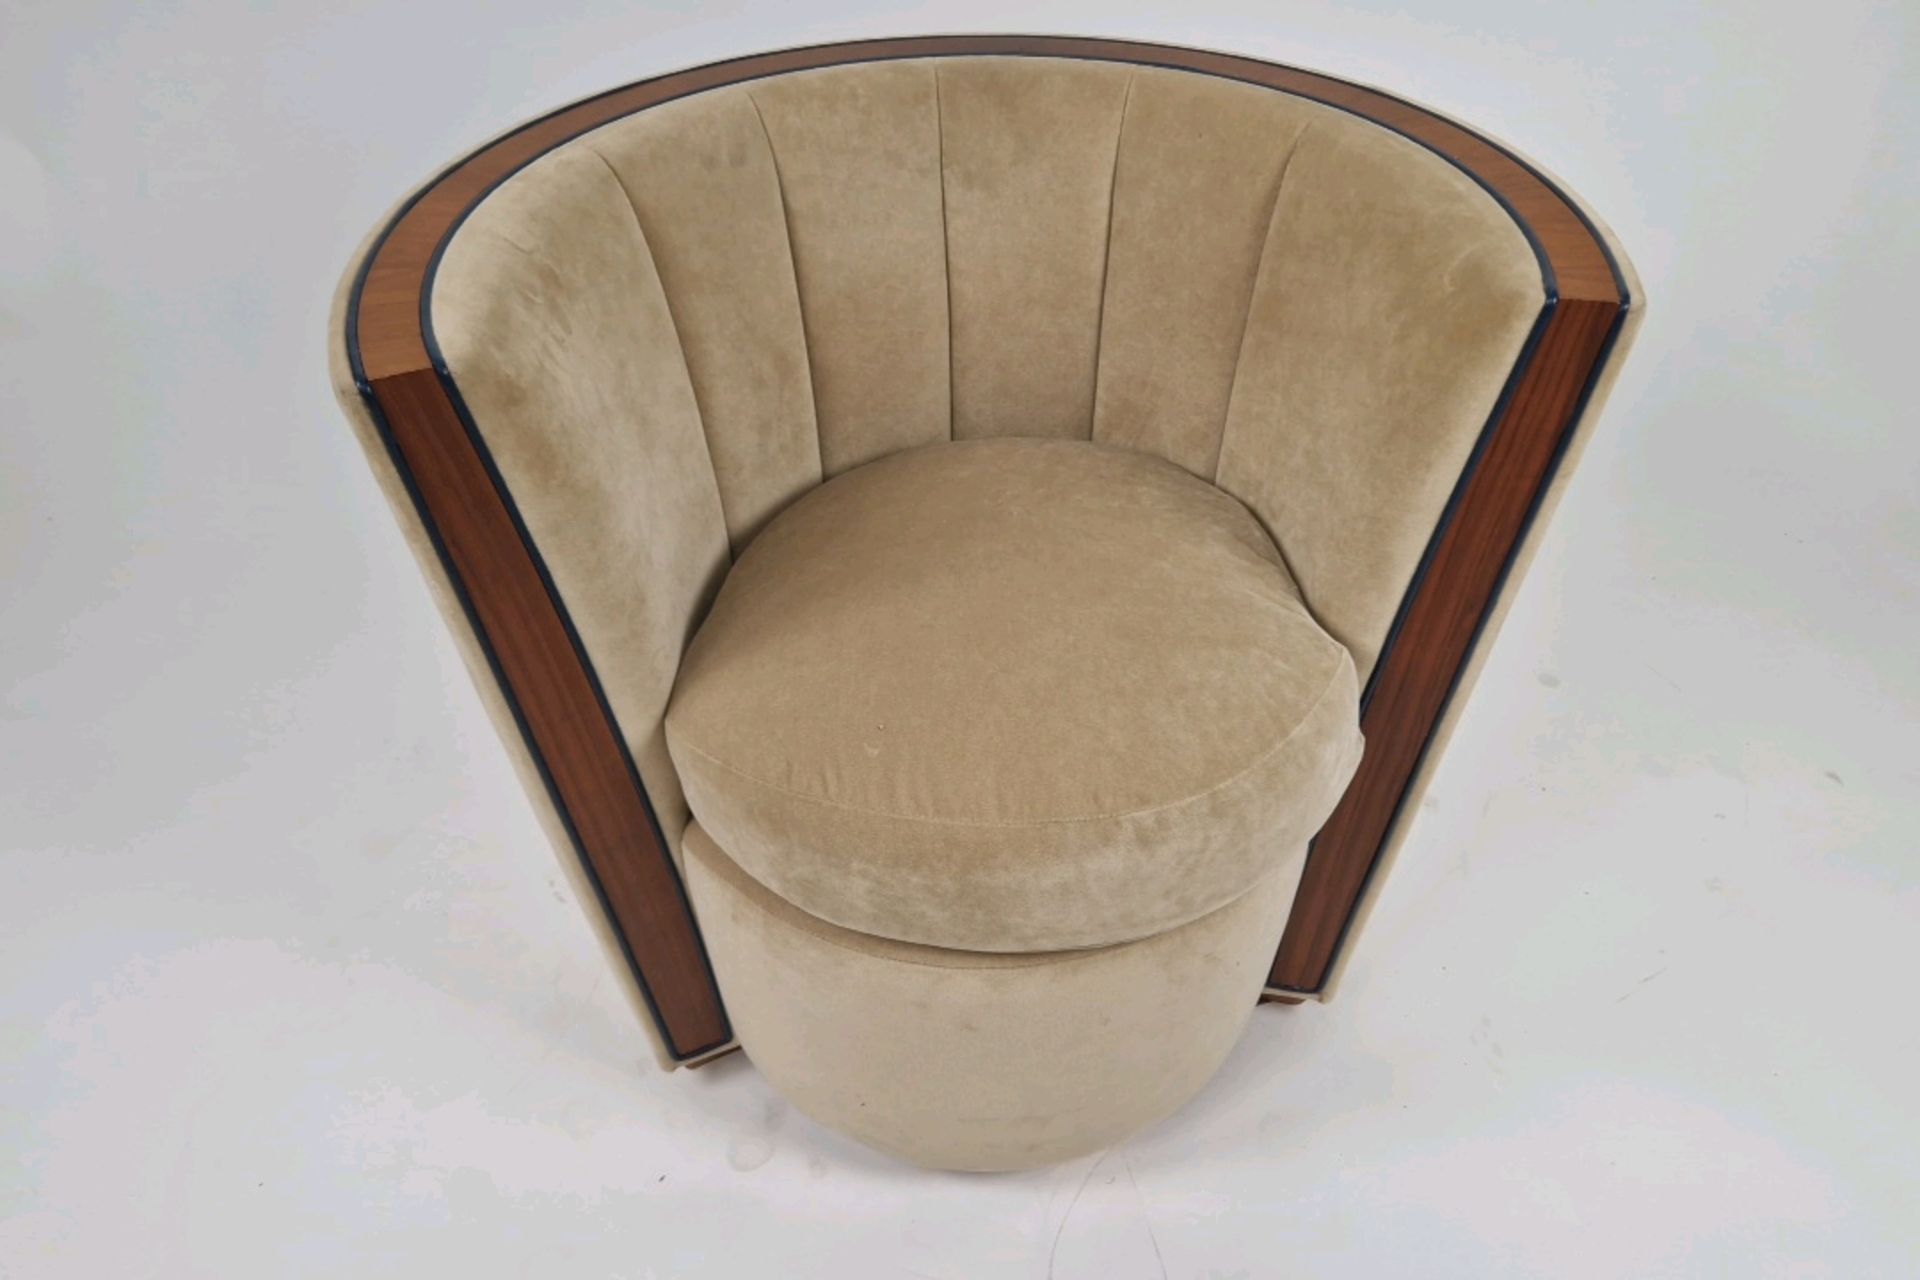 Bespoke David Linley Tub Chair Made for Claridge's Suites